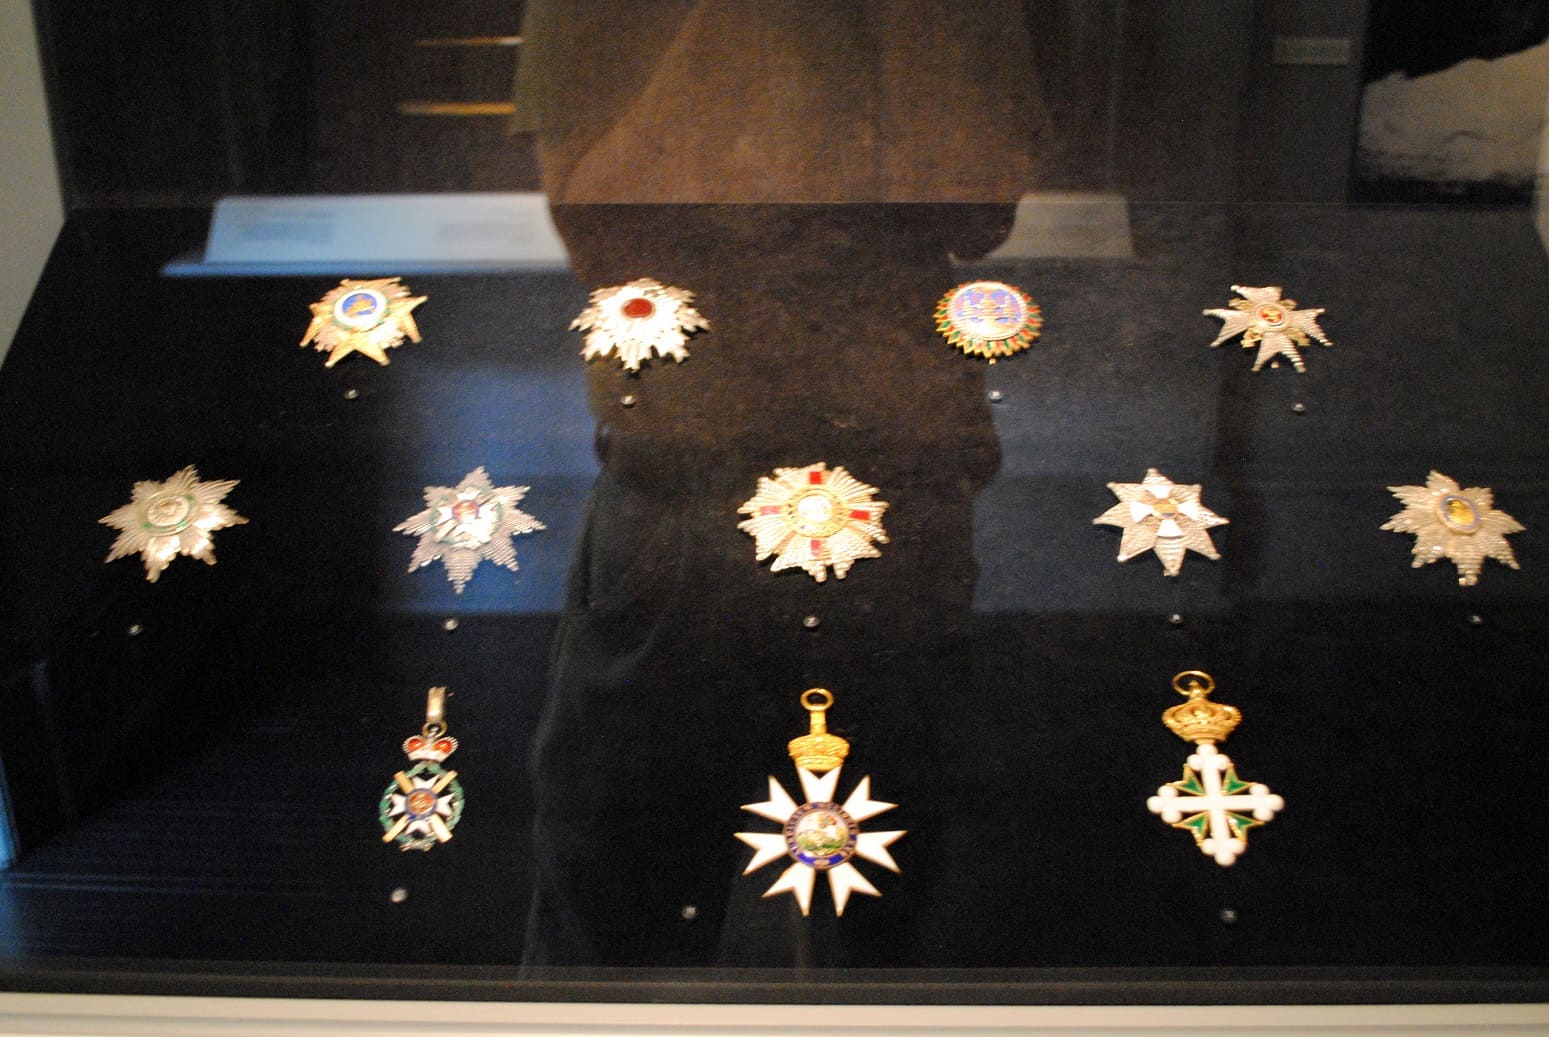 Some of the others awards from the museum collection.jpg